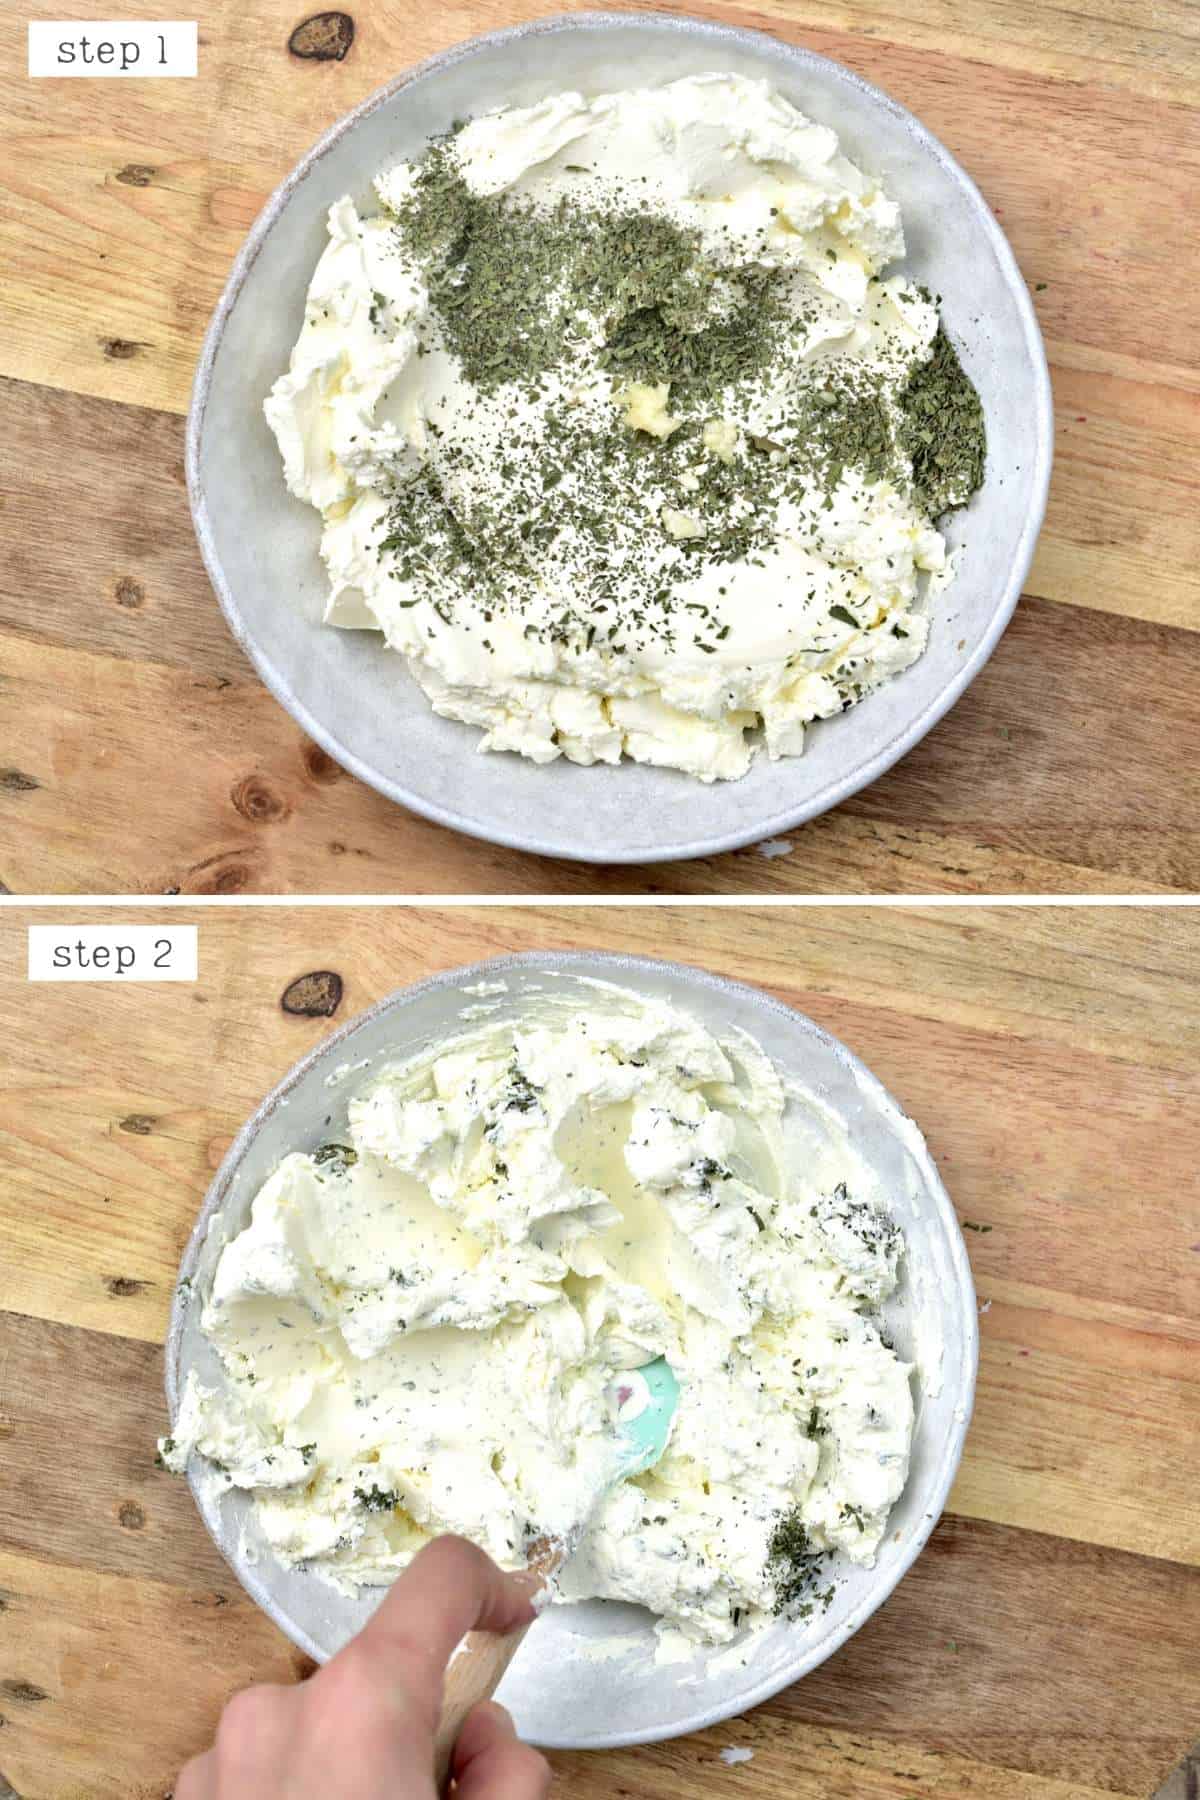 Steps for making a labneh dip